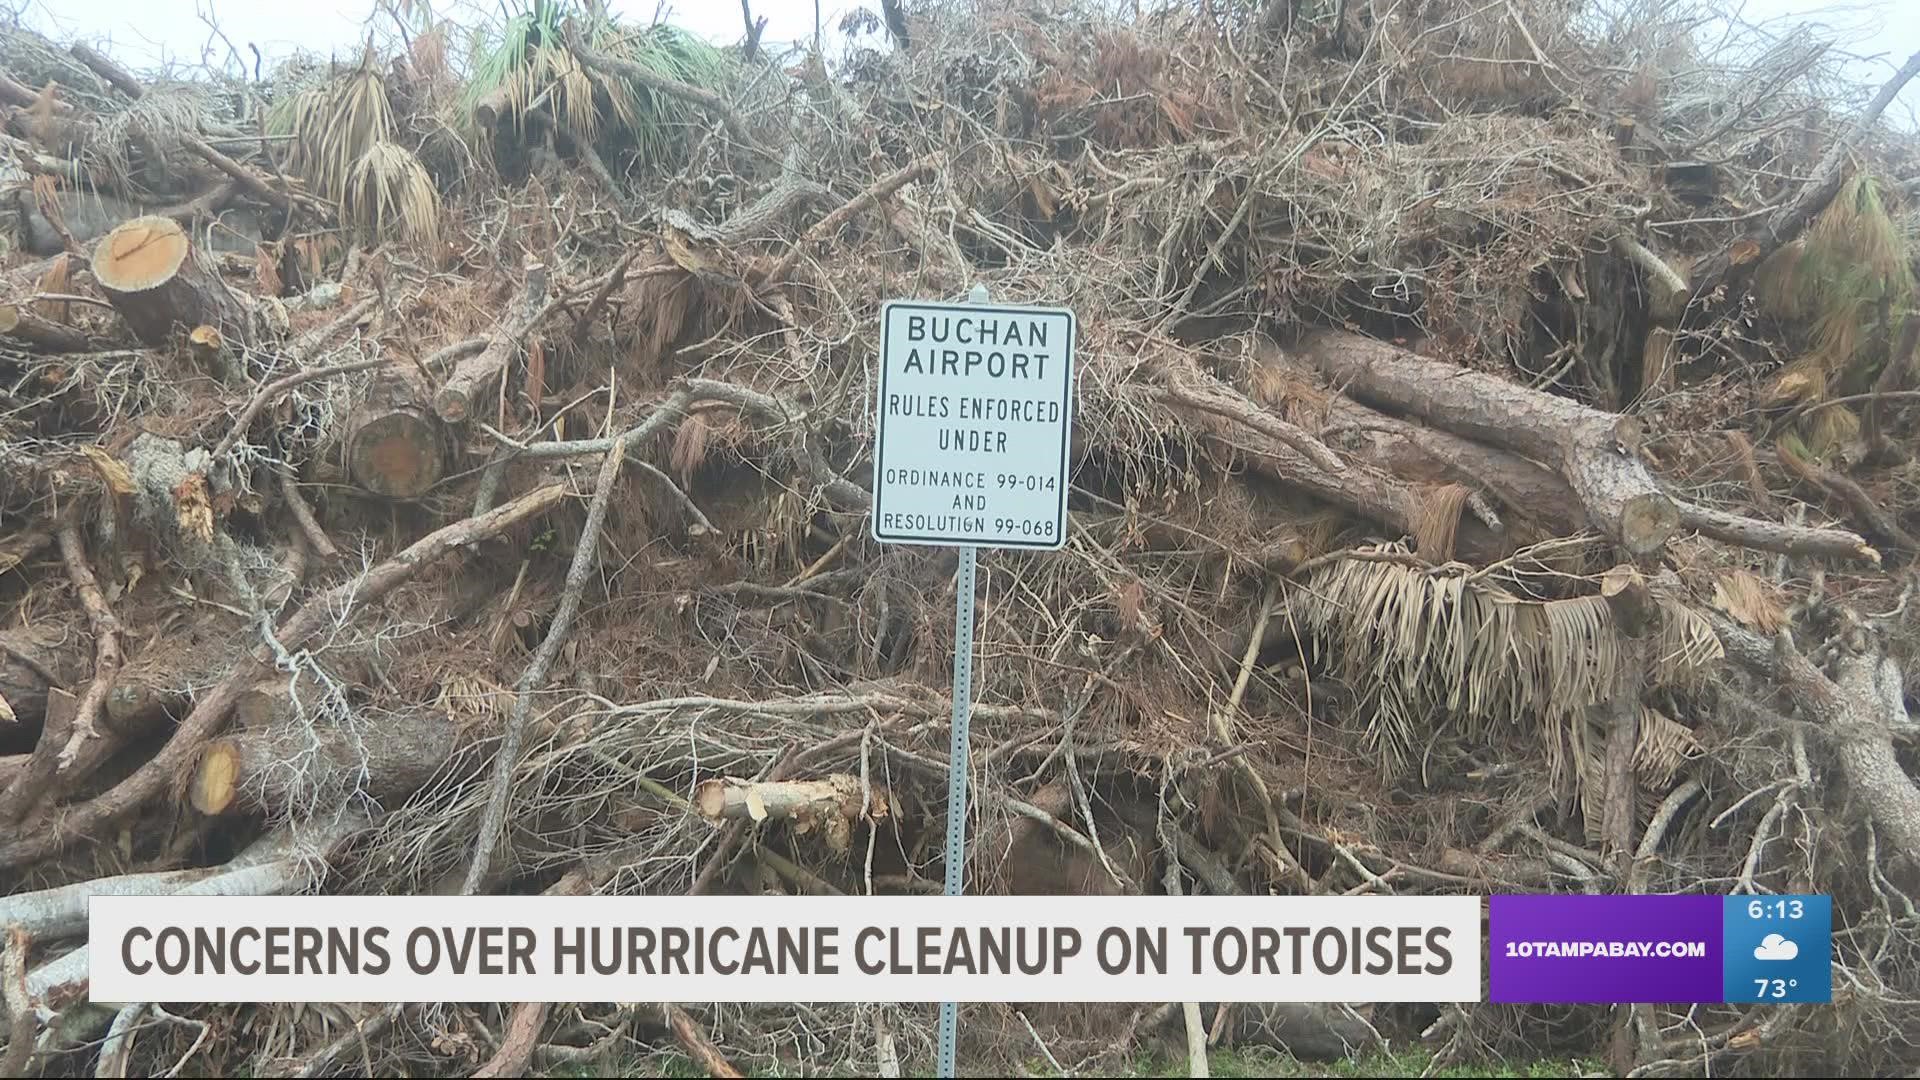 Neighbors in Englewood, Florida, say the debris pile is hindering the gopher tortoise population from eating, possibly starving them out.